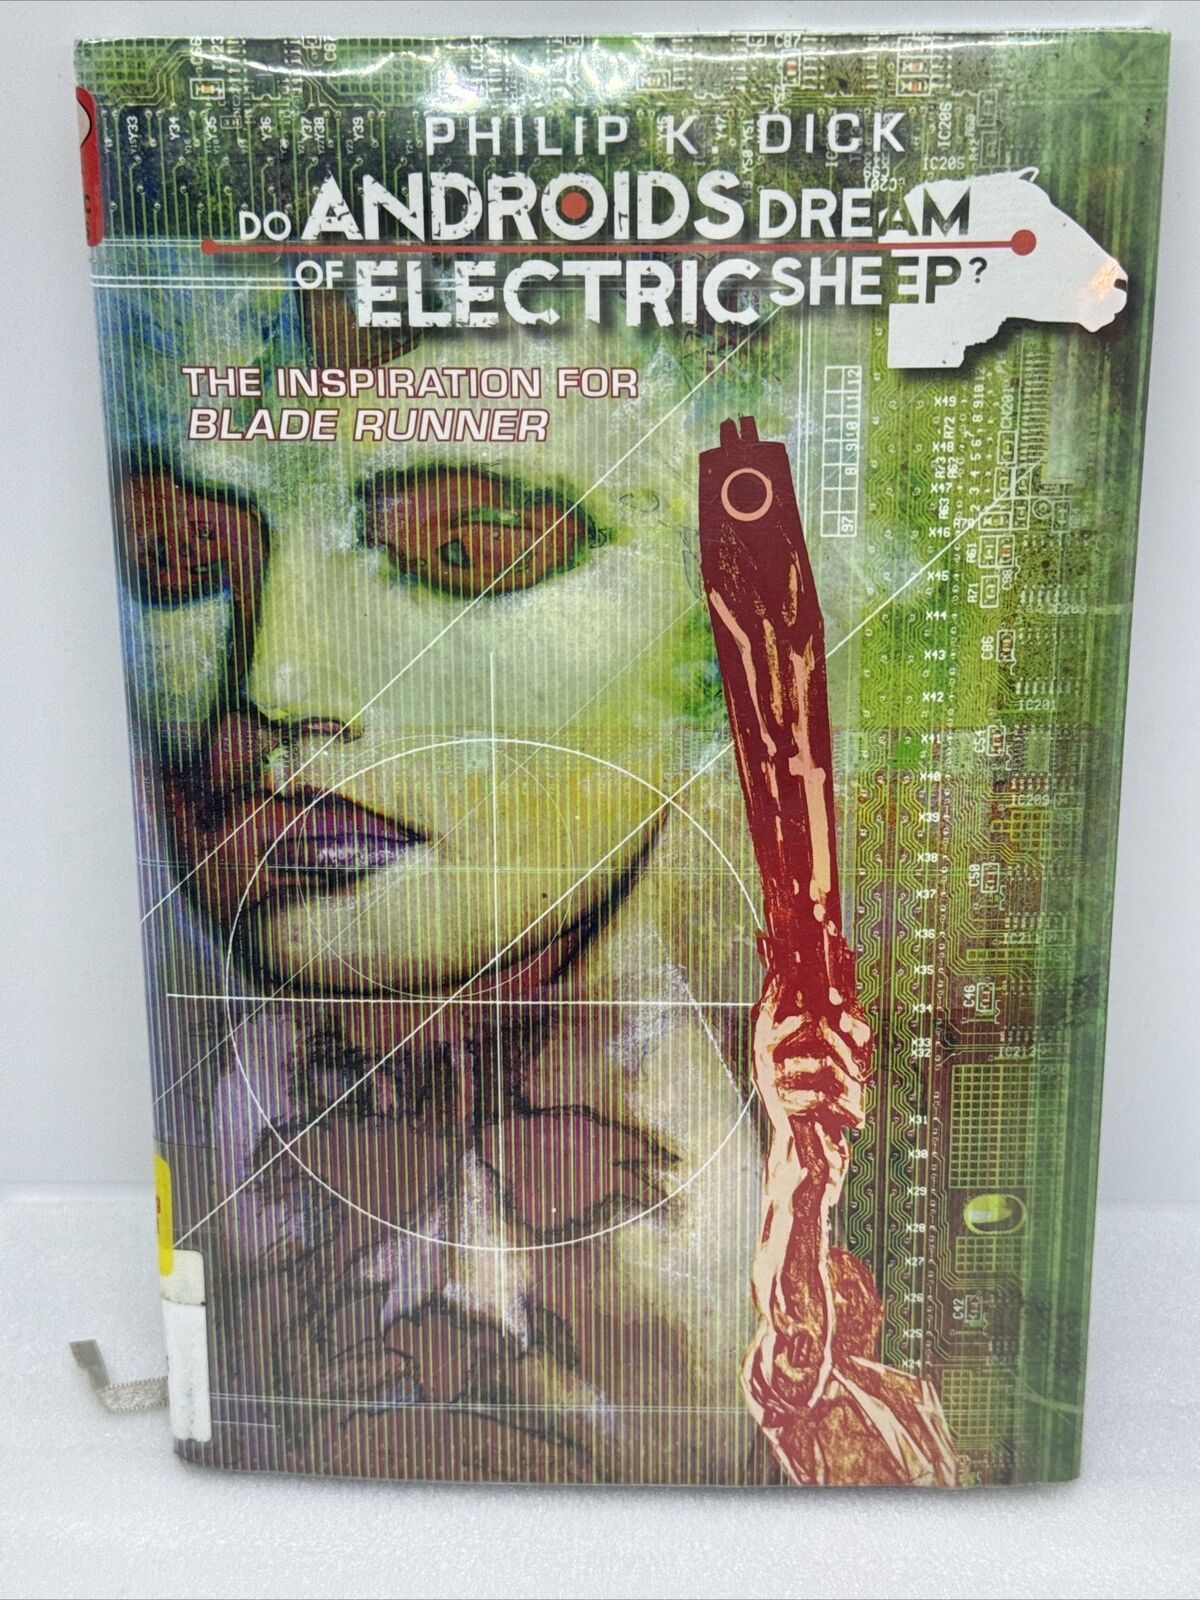 Do Androids Dream Of Electric Sheep Vol 2 Hardcover Boom 2011  Library Bk 1stEd